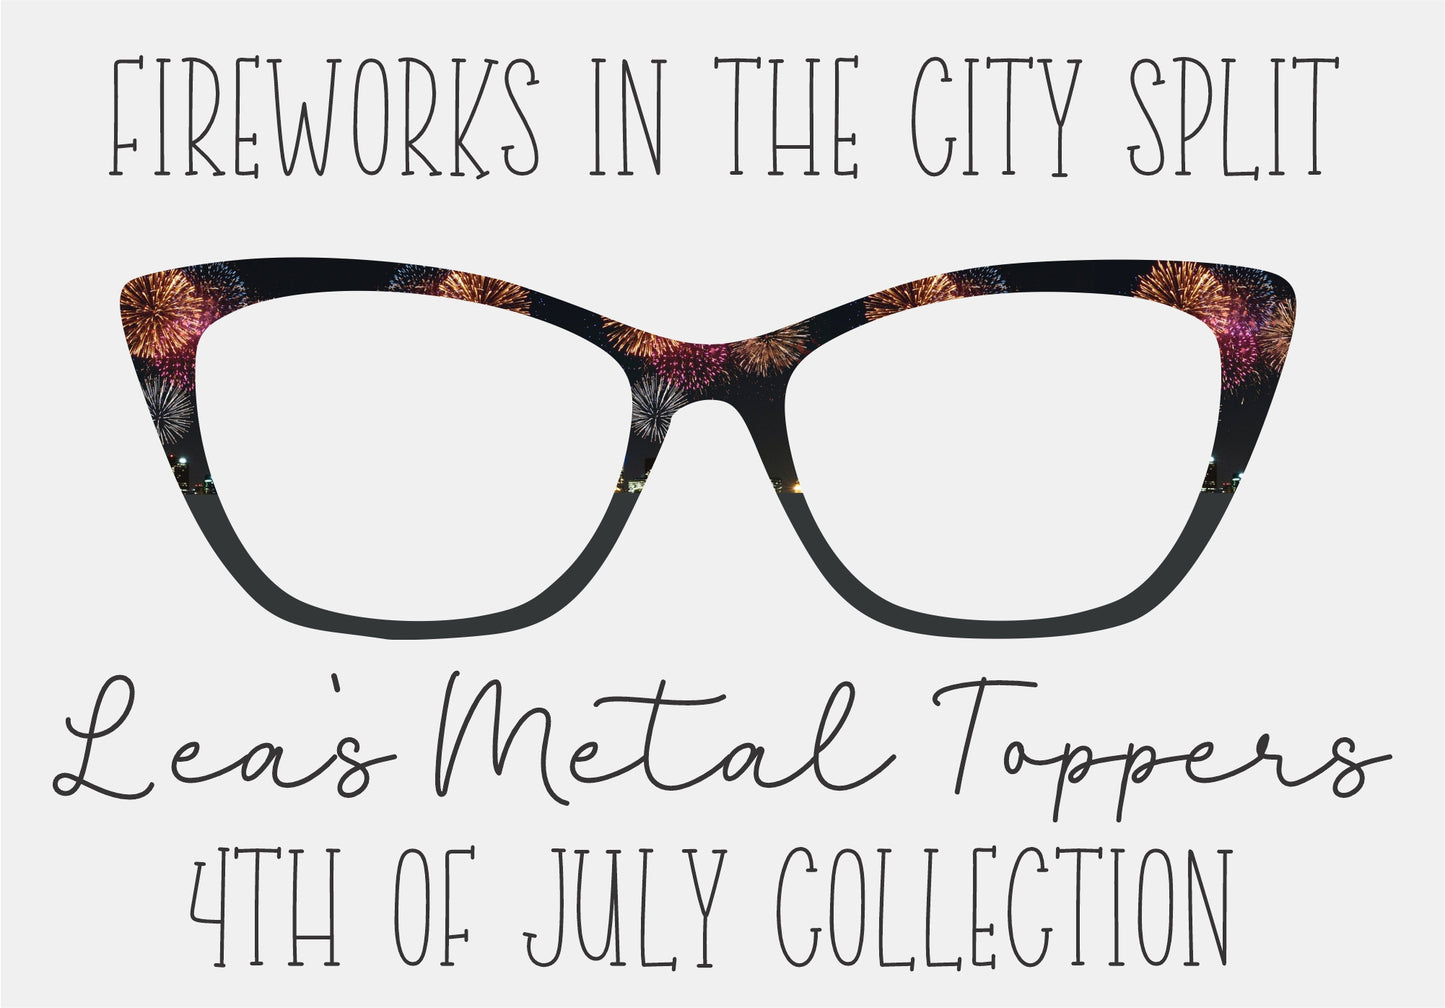 FIREWORKS IN THE CITY SPLIT Eyewear Frame Toppers COMES WITH MAGNETS